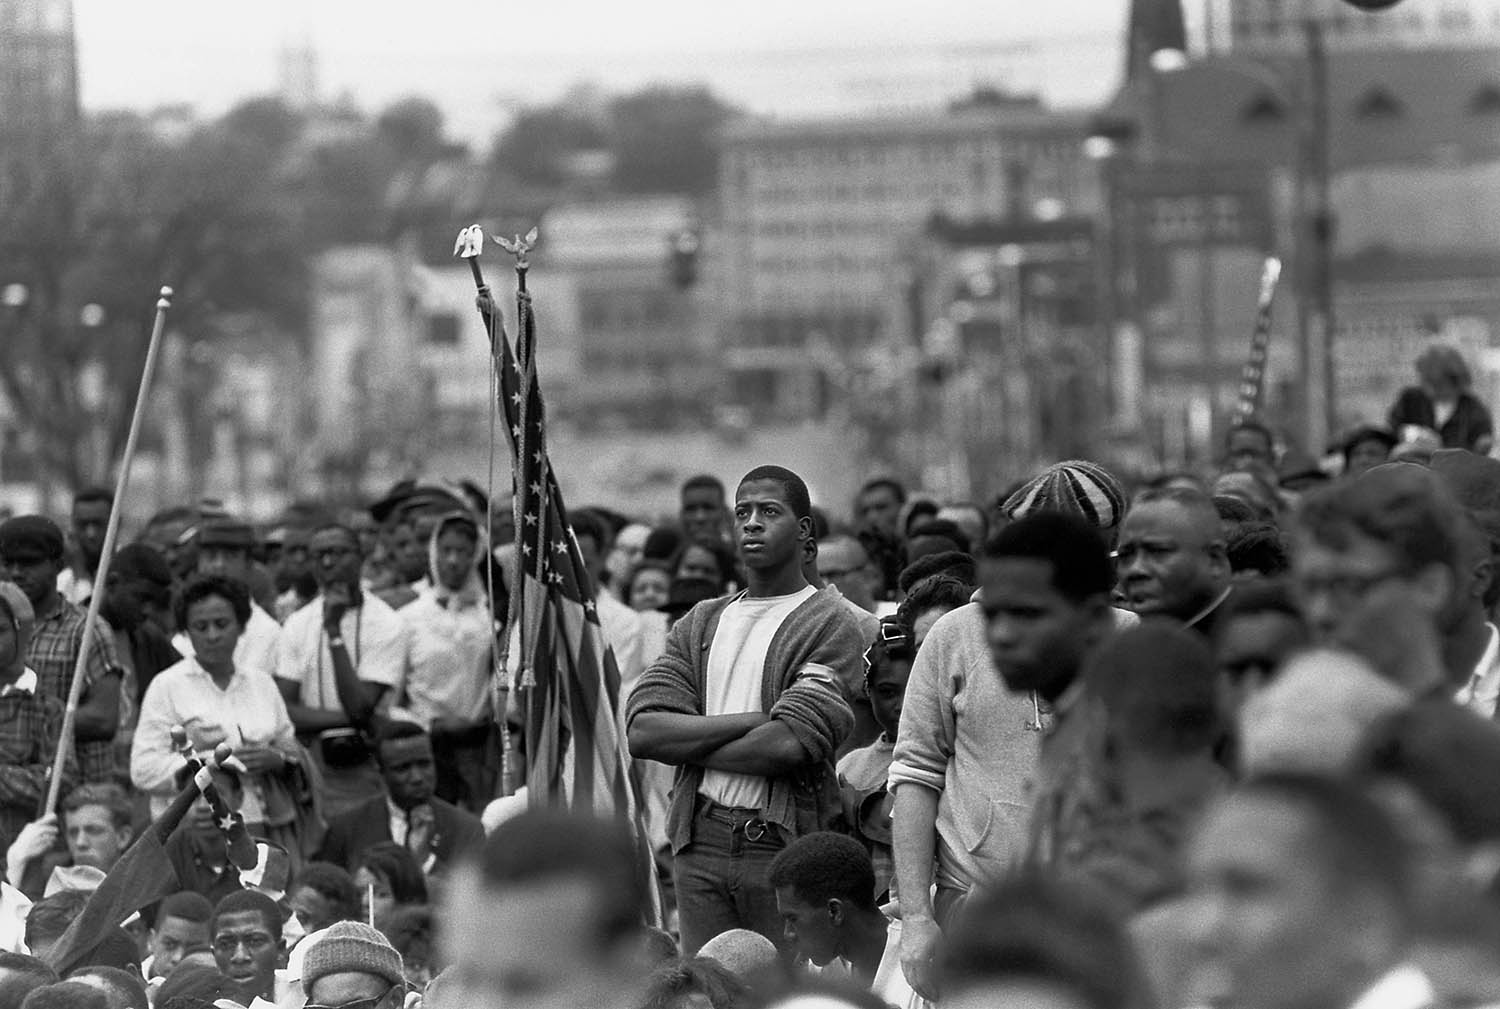  Bruce Davidson,  At the end of the Selma March, crowds gather outside of the Alabama State Capitol , 1965. © Bruce Davidson /&nbsp;Magnum Photos 